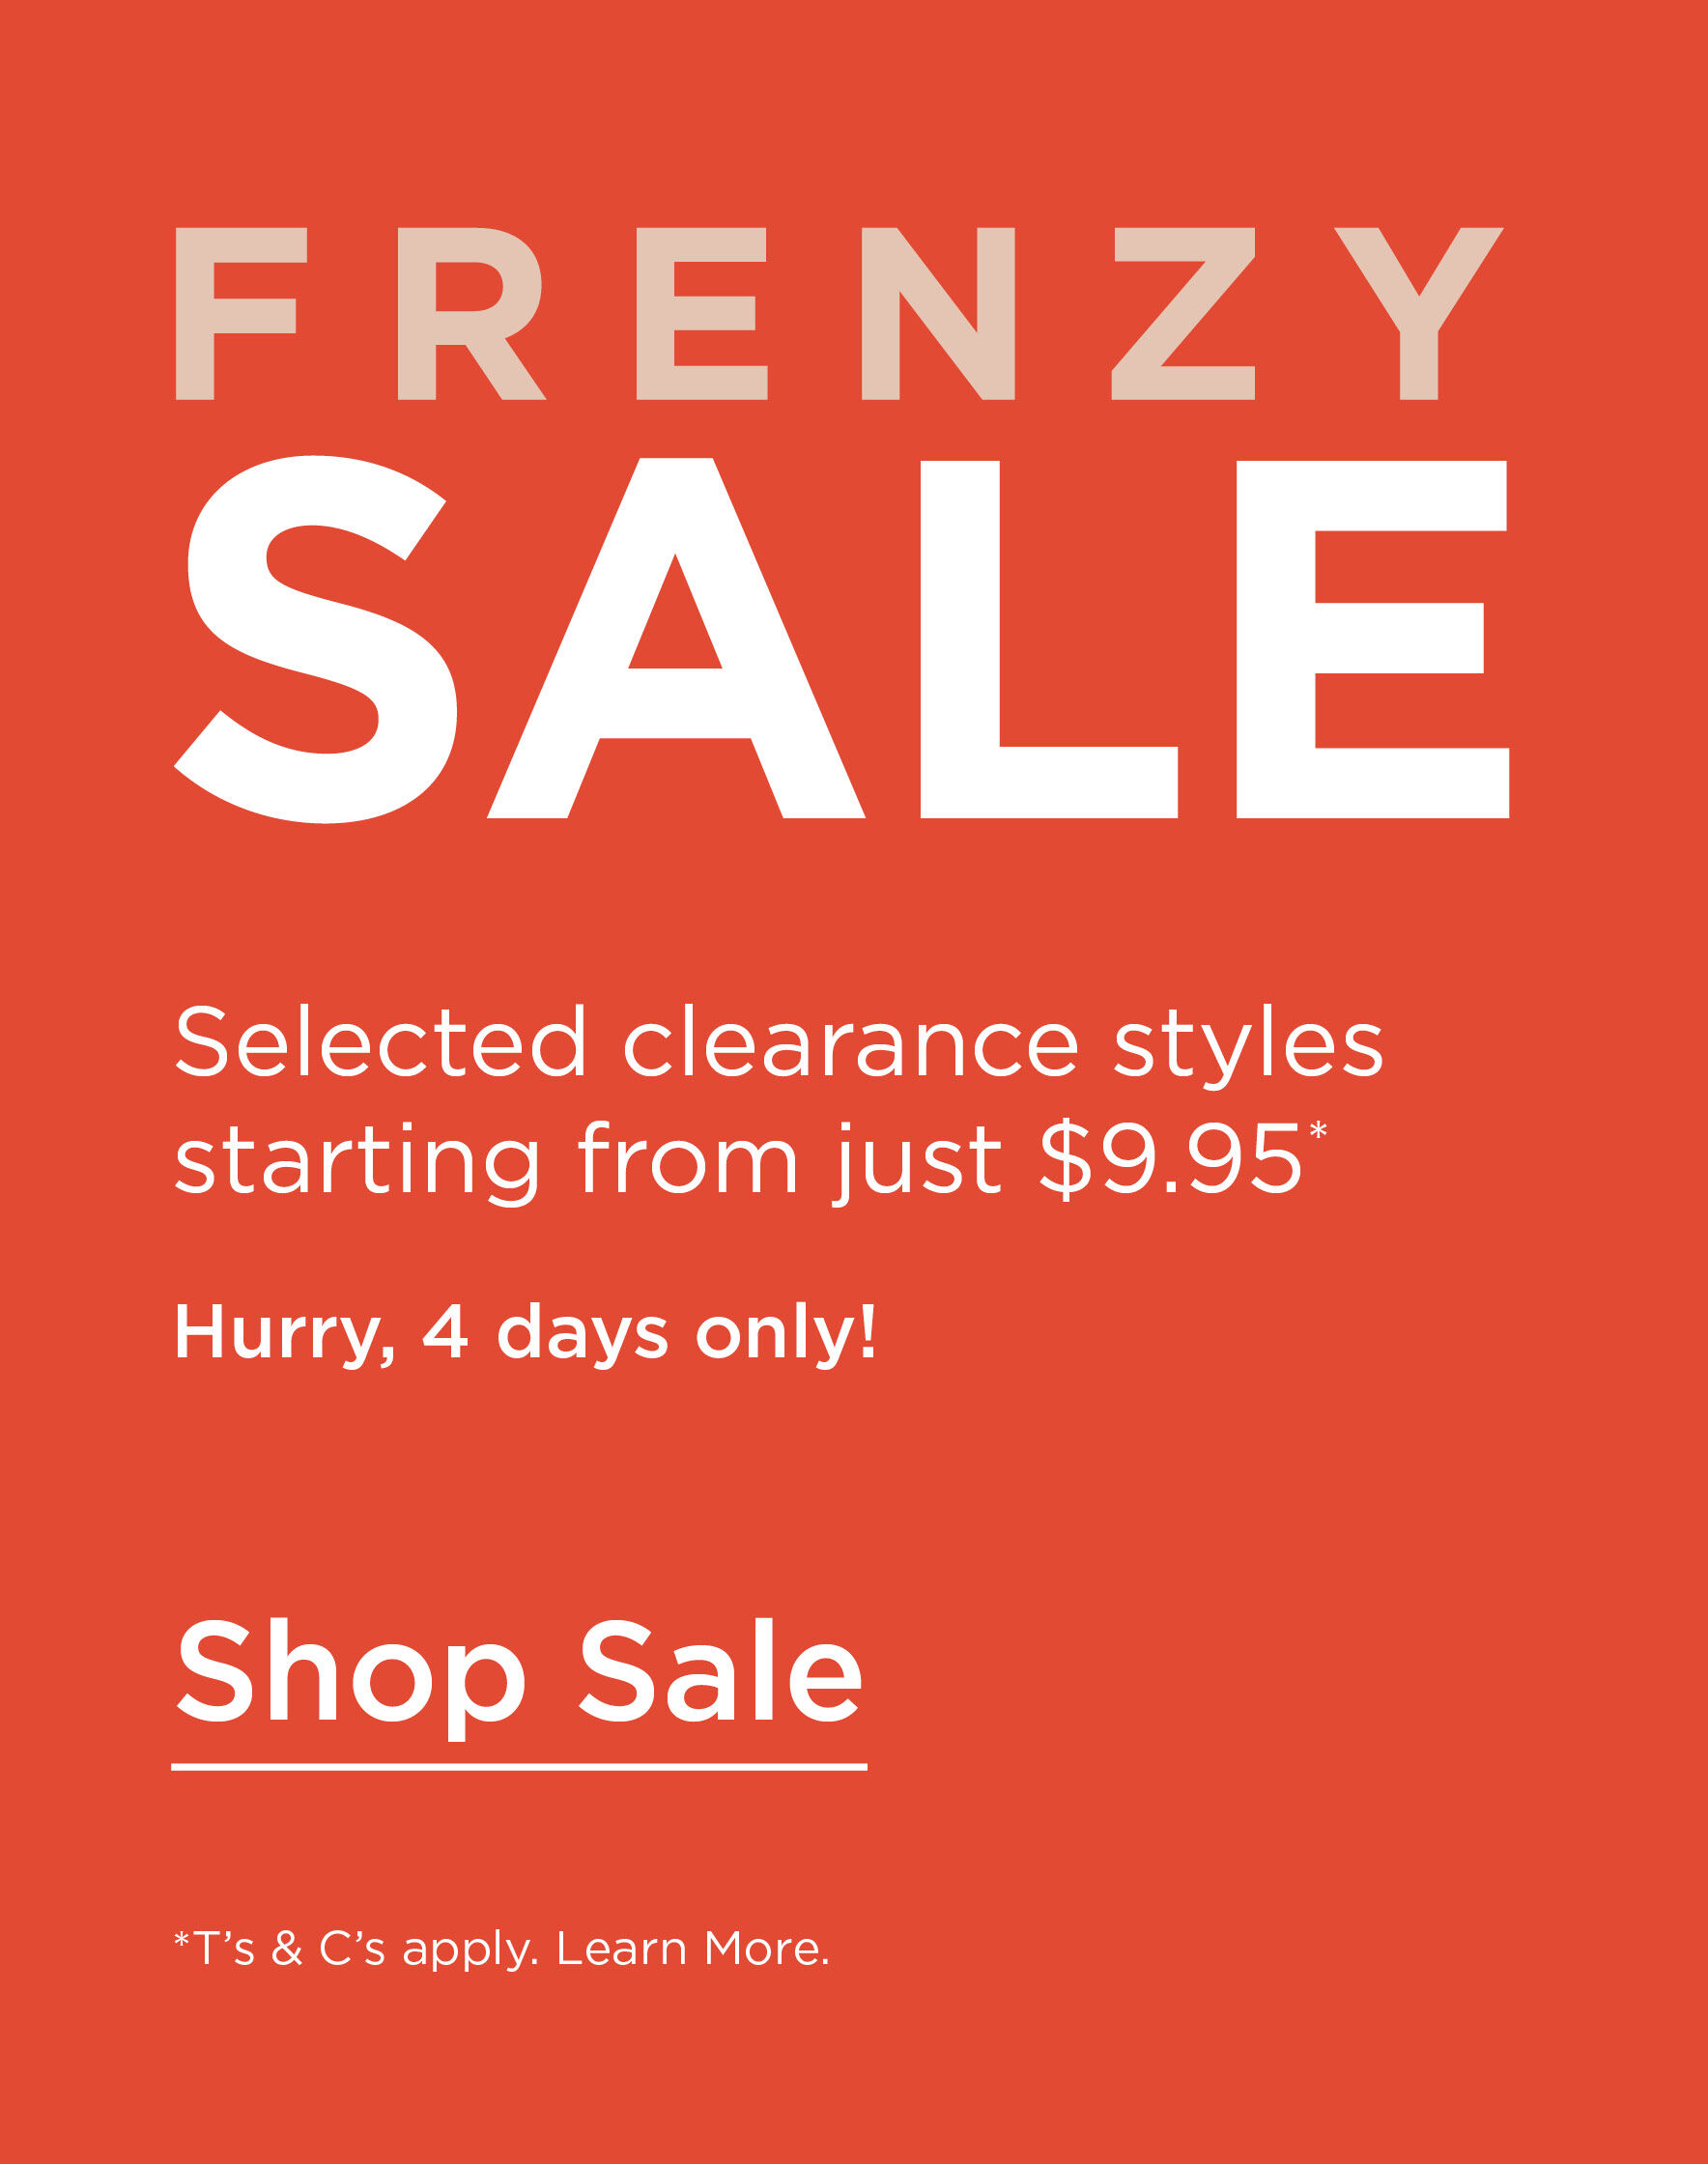 Frenzy Sale - Selected clearance styles starting from just $9.95*